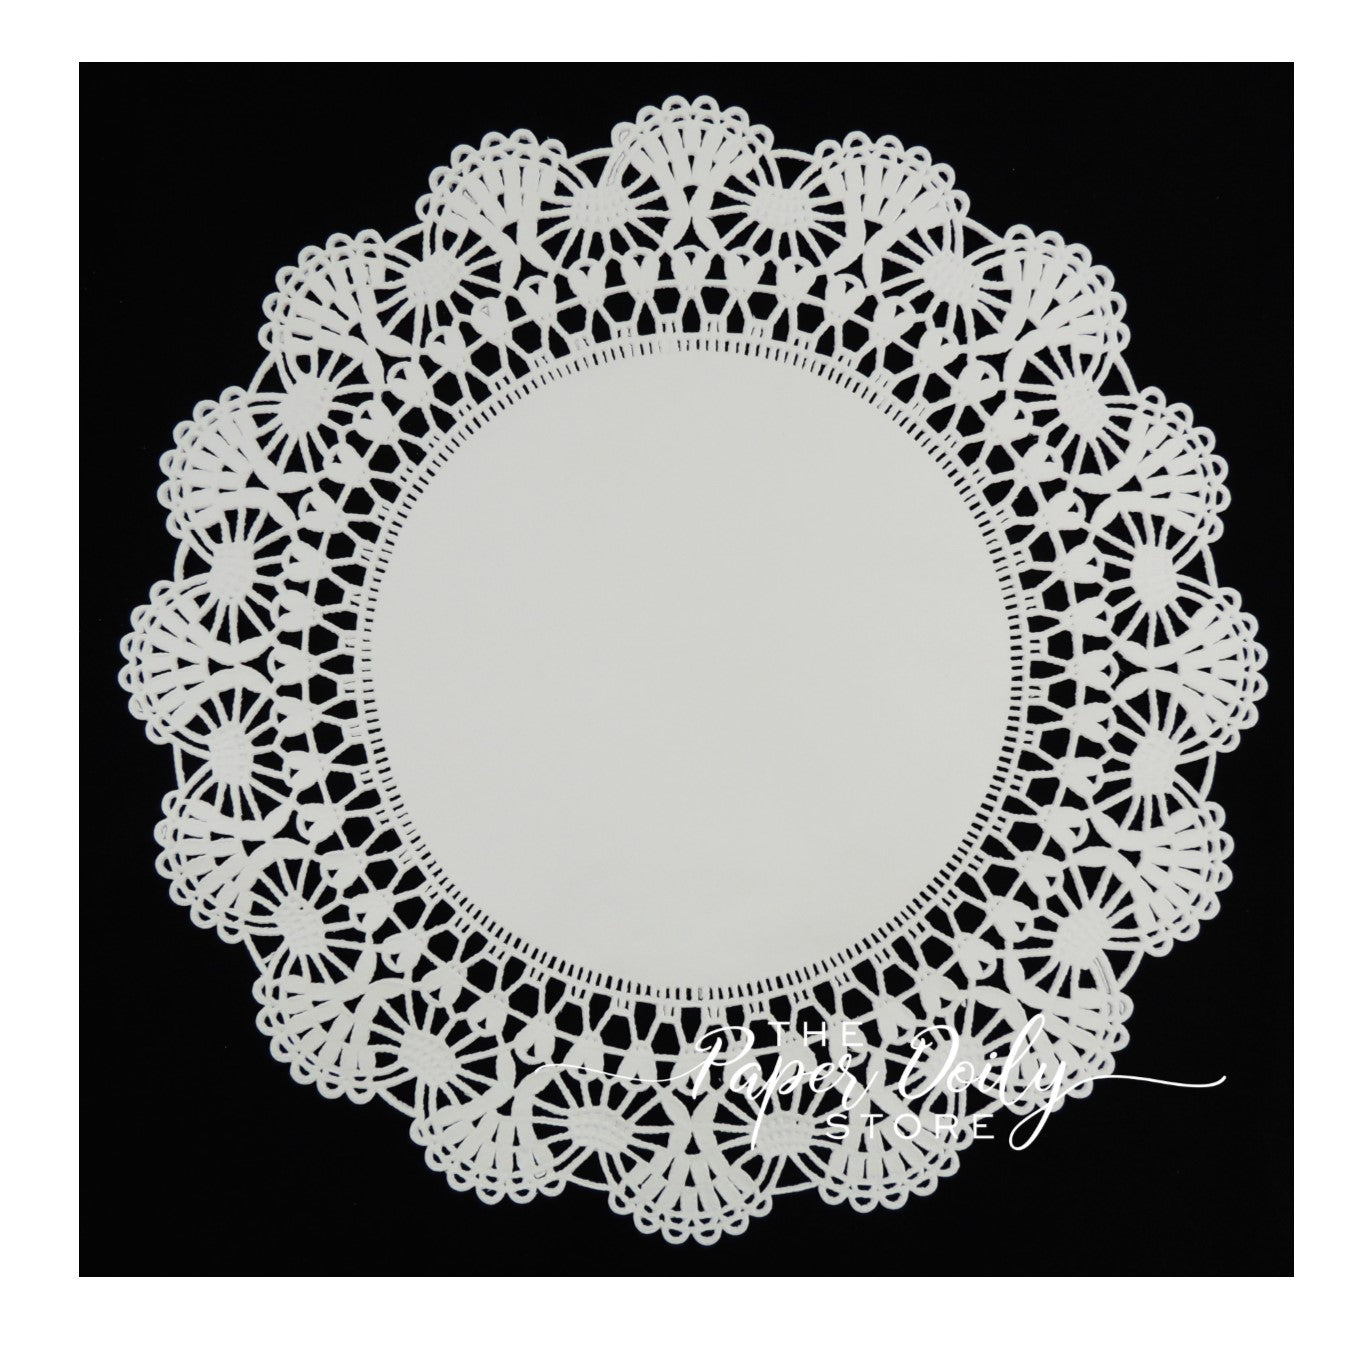 4 Inch White Lace Paper Doily, Set of 50 Round Paper Doilies for Decorating  Paper Crafts, Scrapbooks, Journals, Mixed Media Projects 